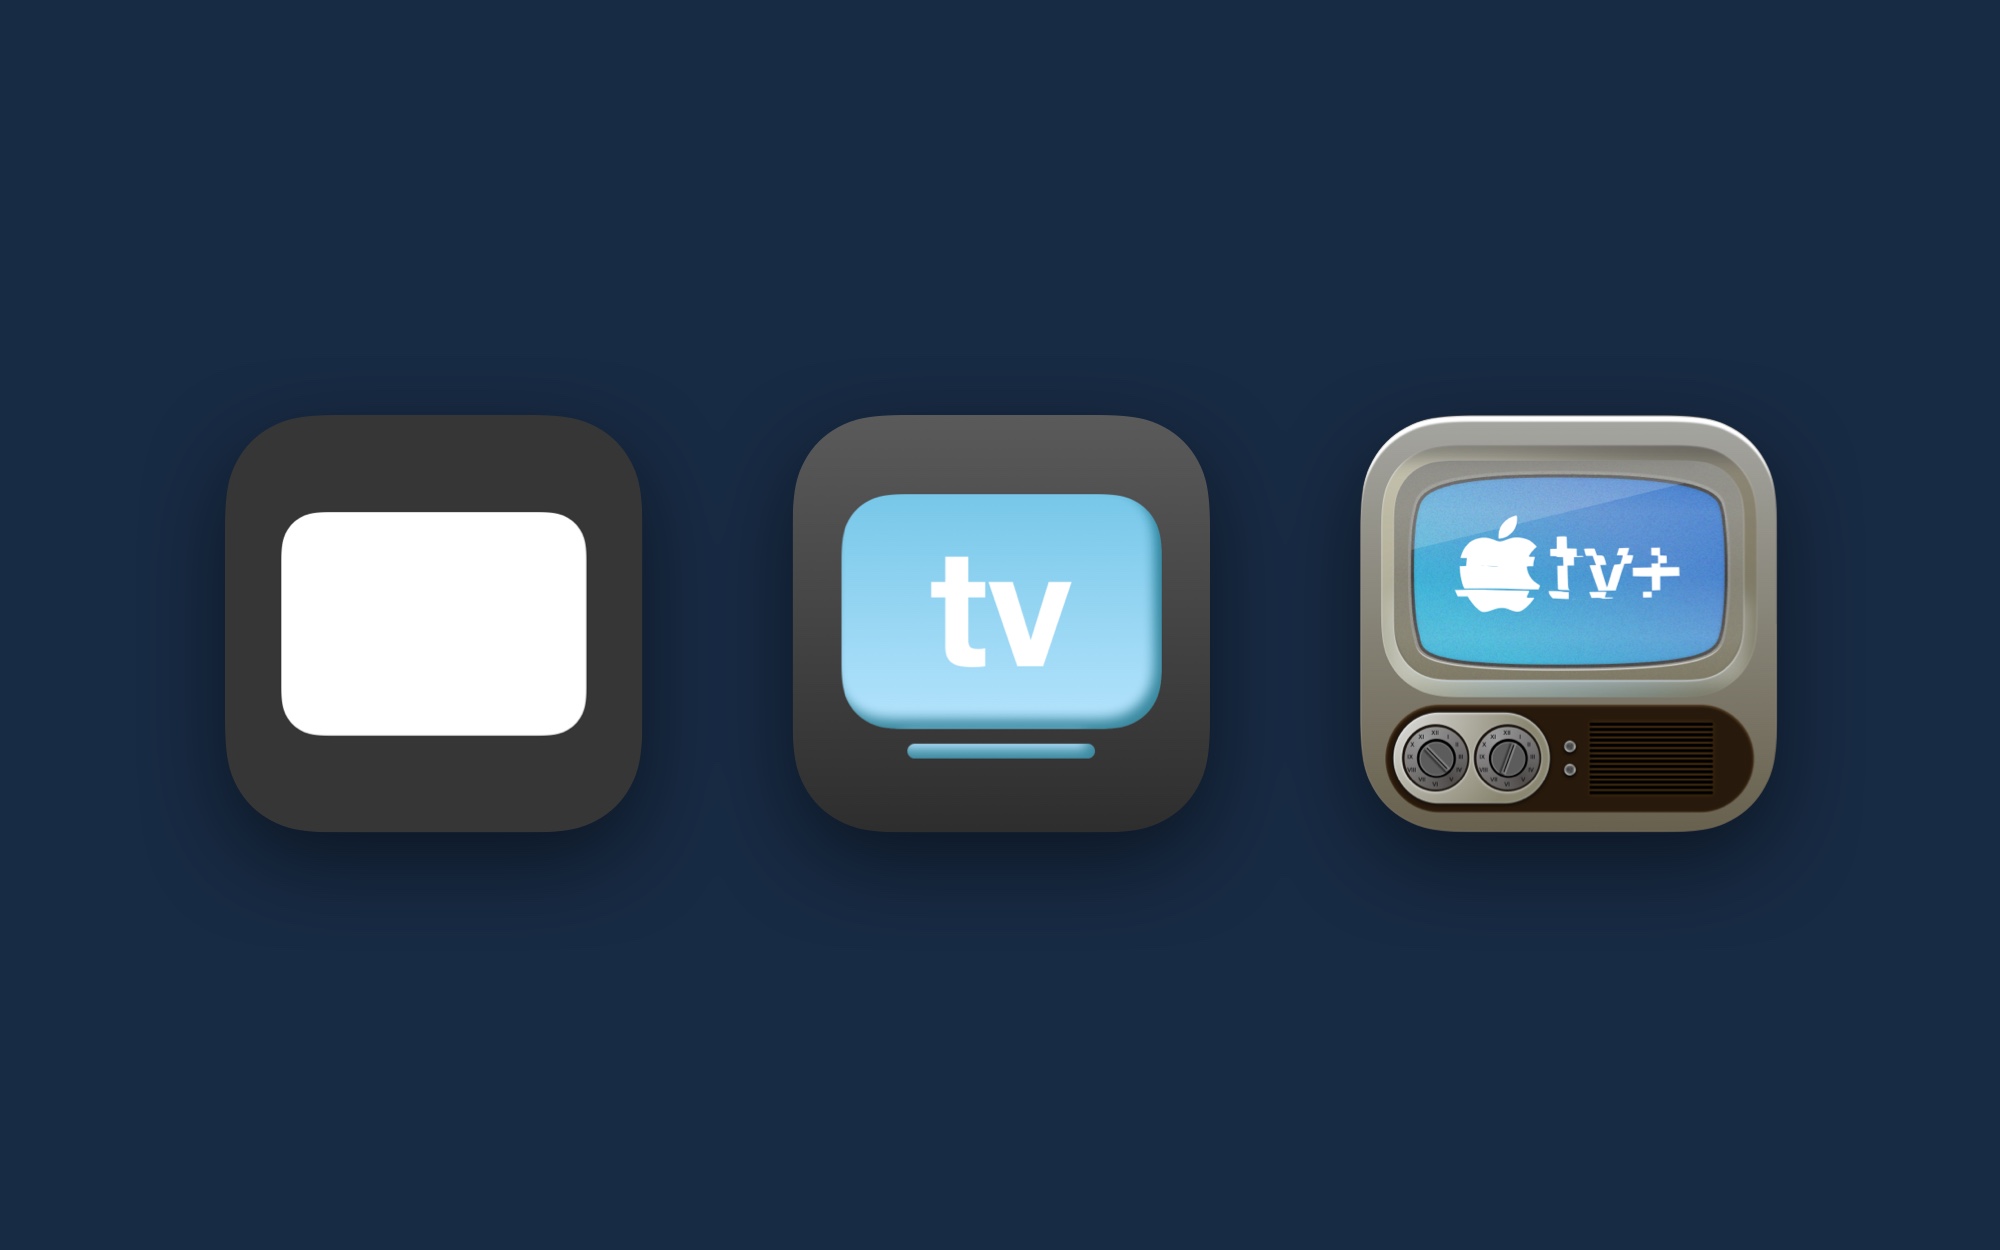 Comparison of the television app icon in abstract, gradient and textured themes.